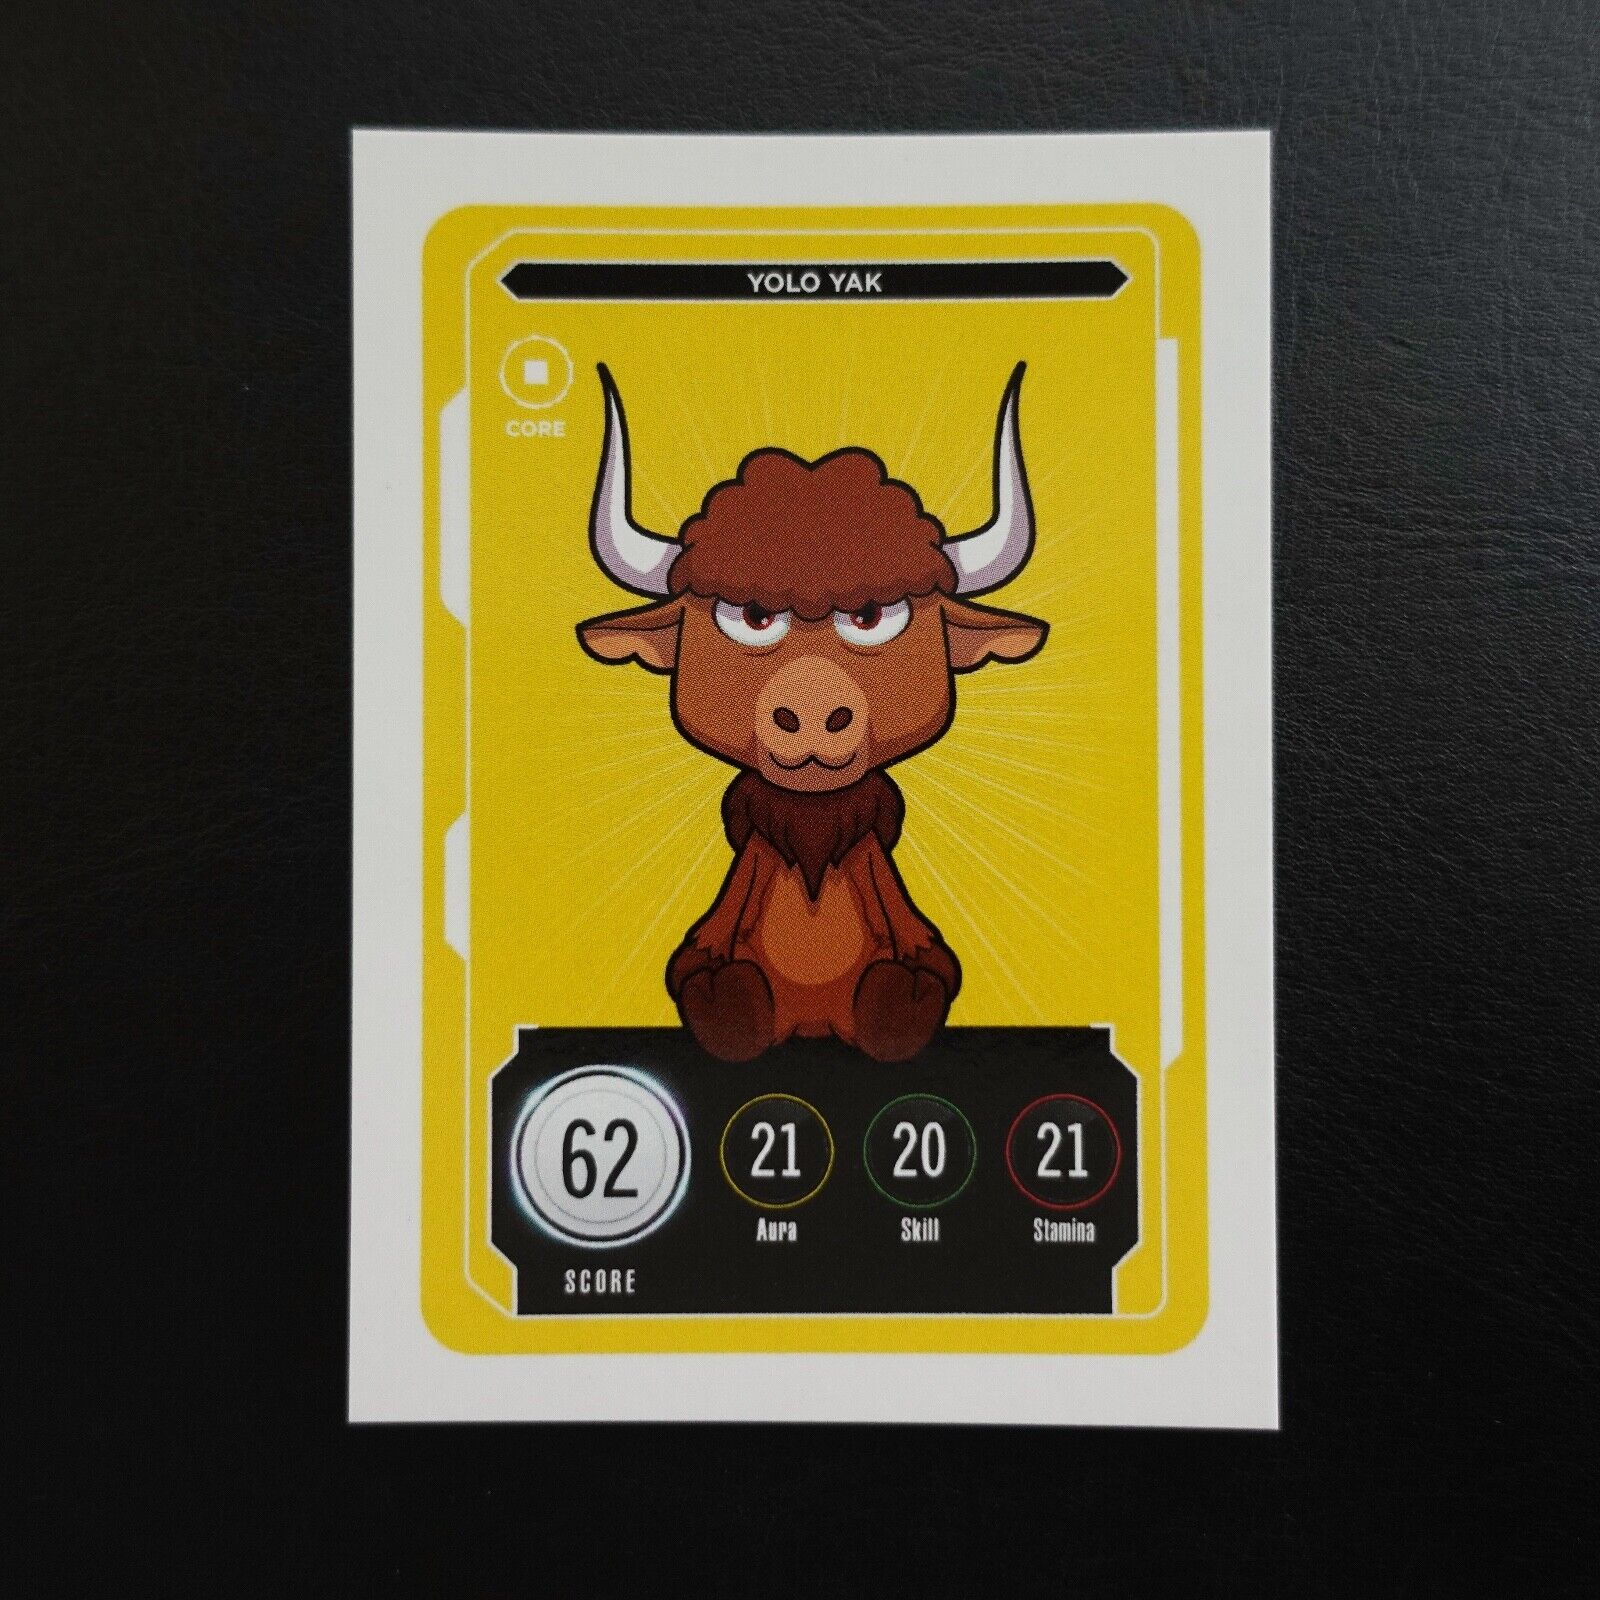 Yolo Yak Veefriends Compete And Collect Series 2 Trading Card Gary Vee